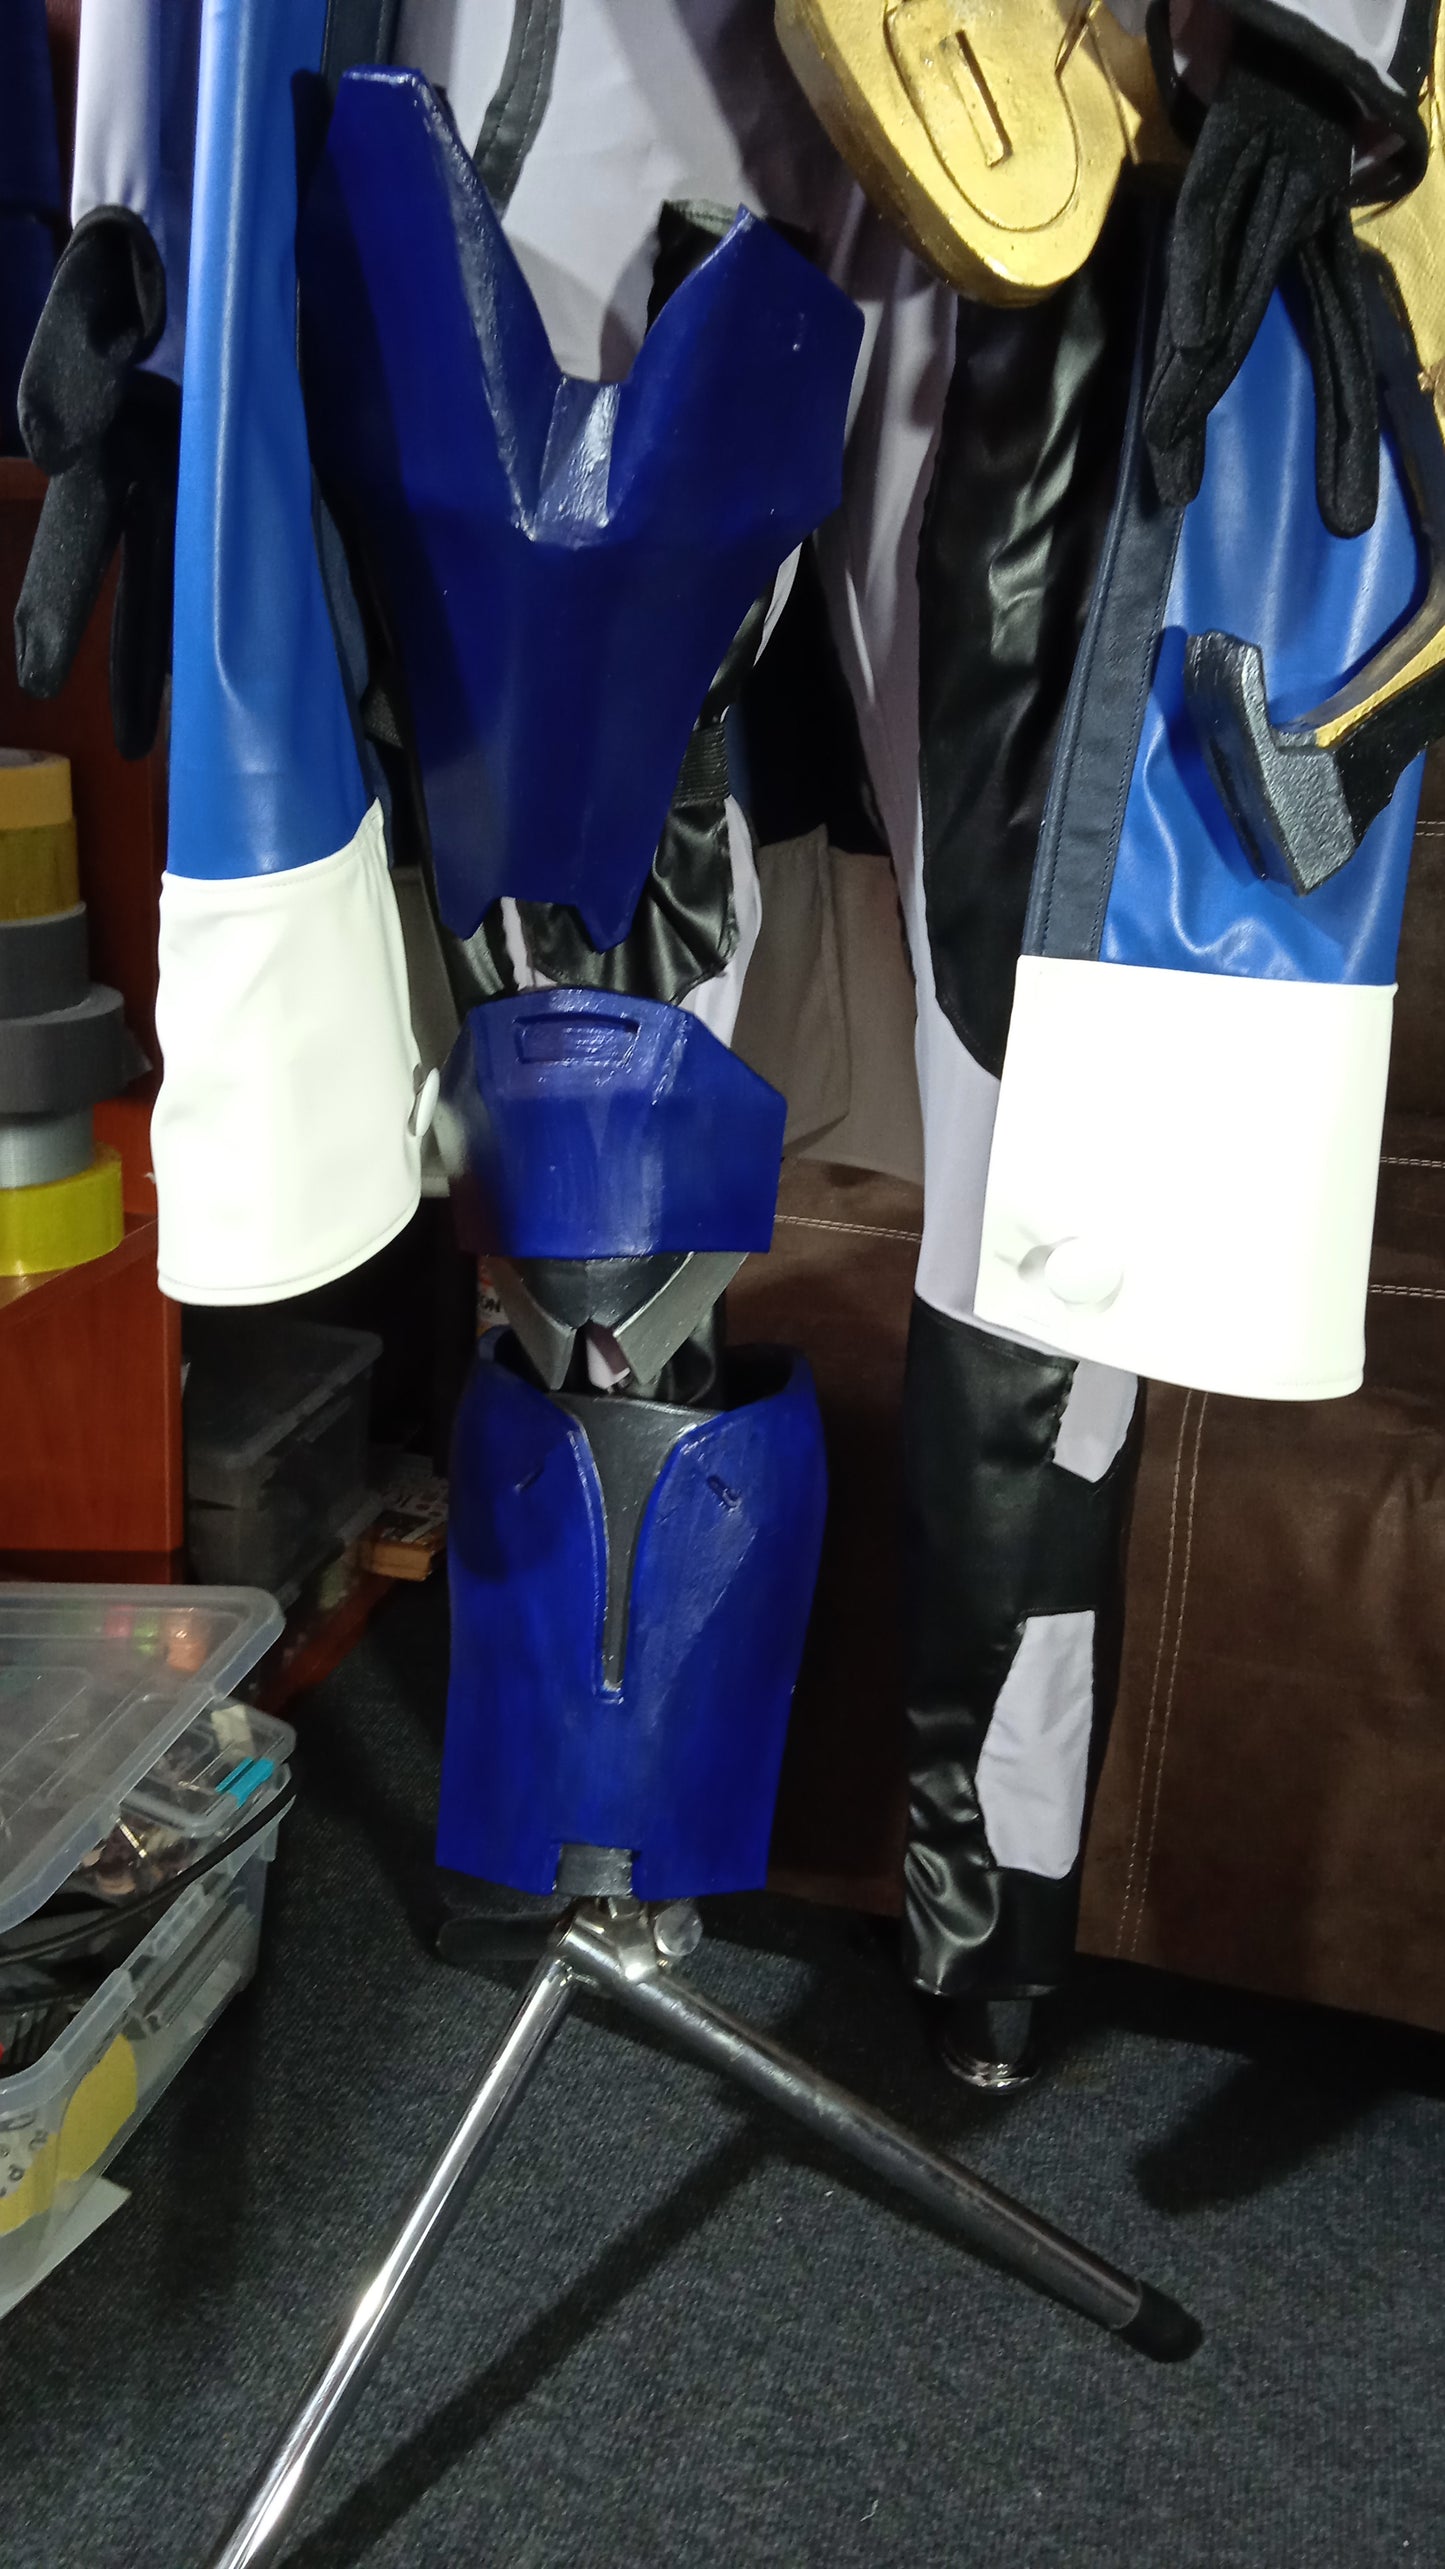 Overwatch Ana Horus cosplay outfit